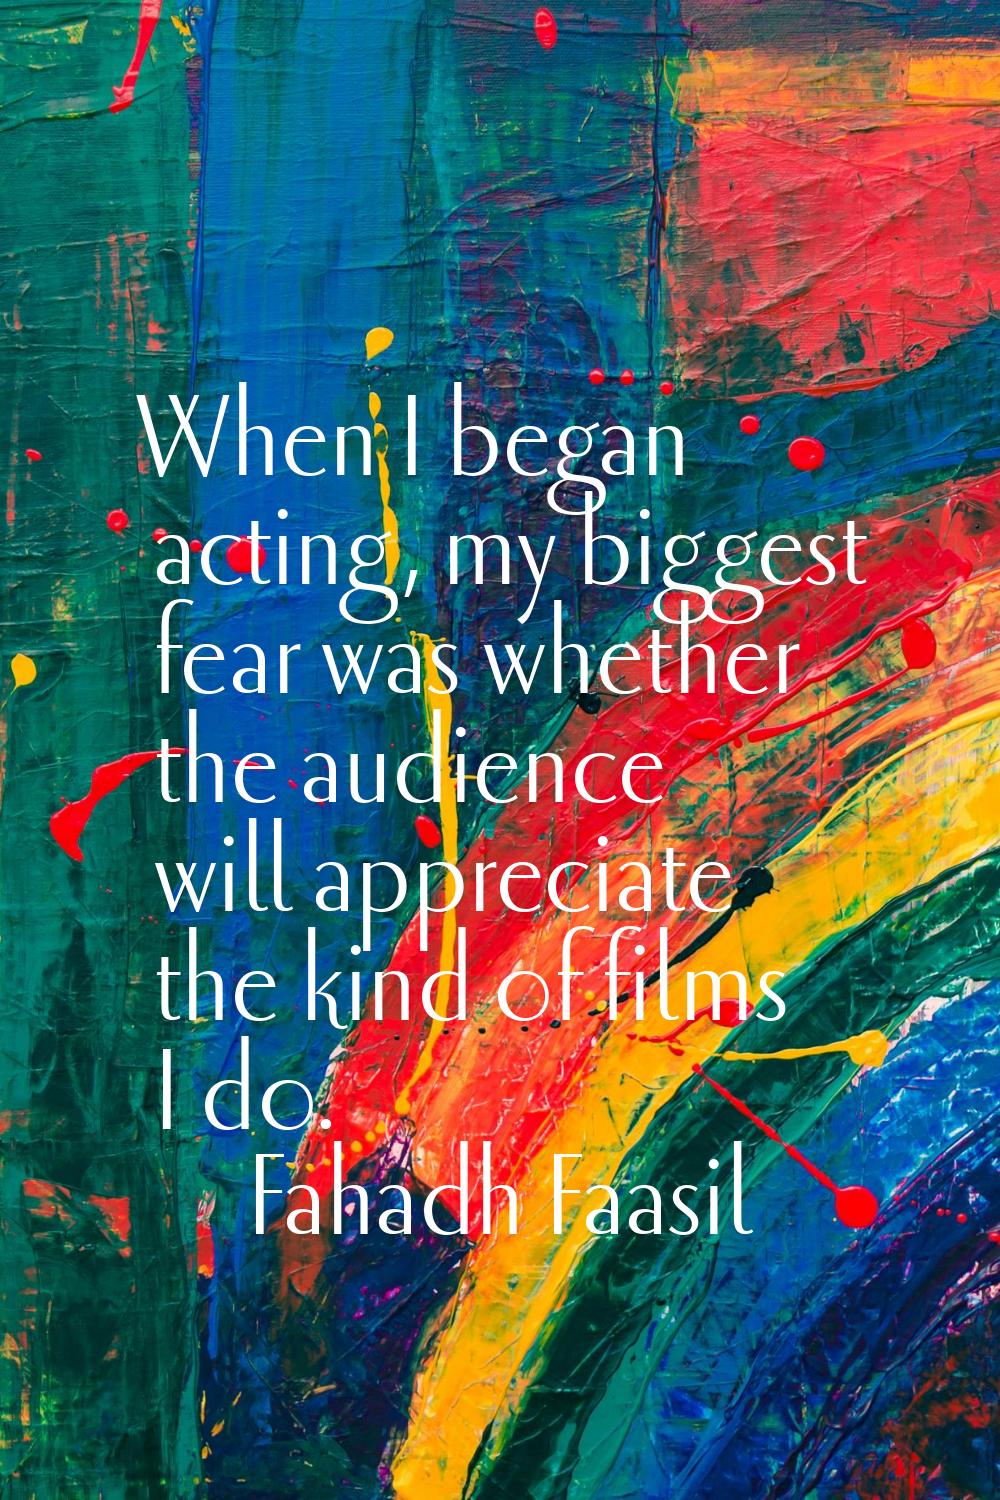 When I began acting, my biggest fear was whether the audience will appreciate the kind of films I d